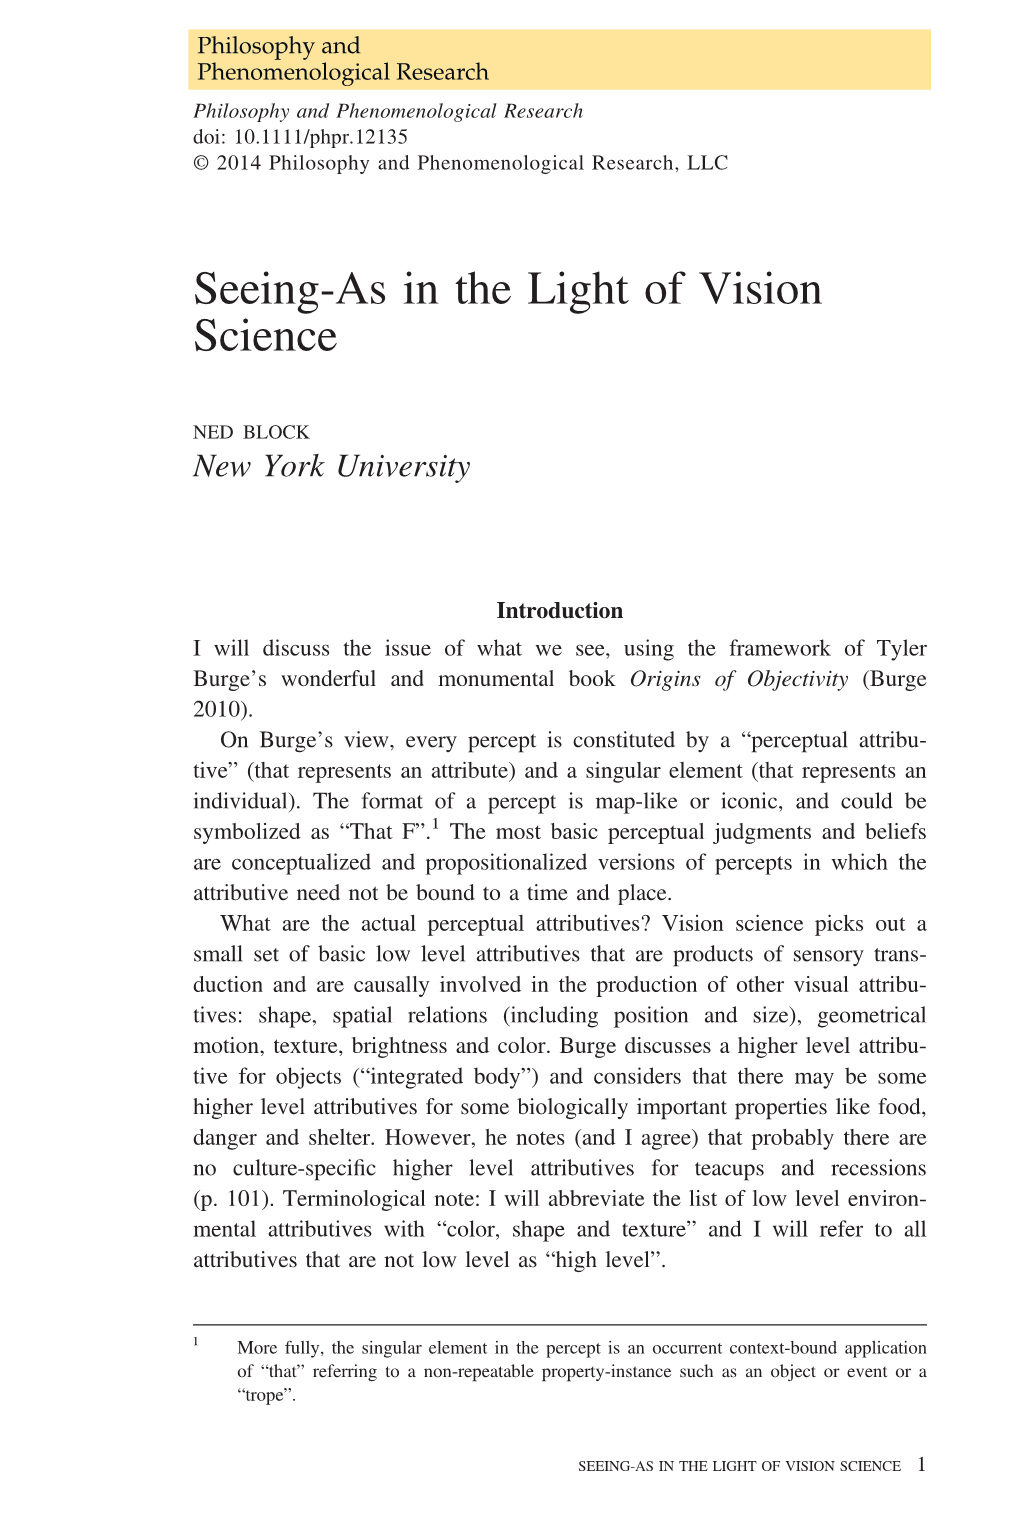 Seeing-As in the Light of Vision Science